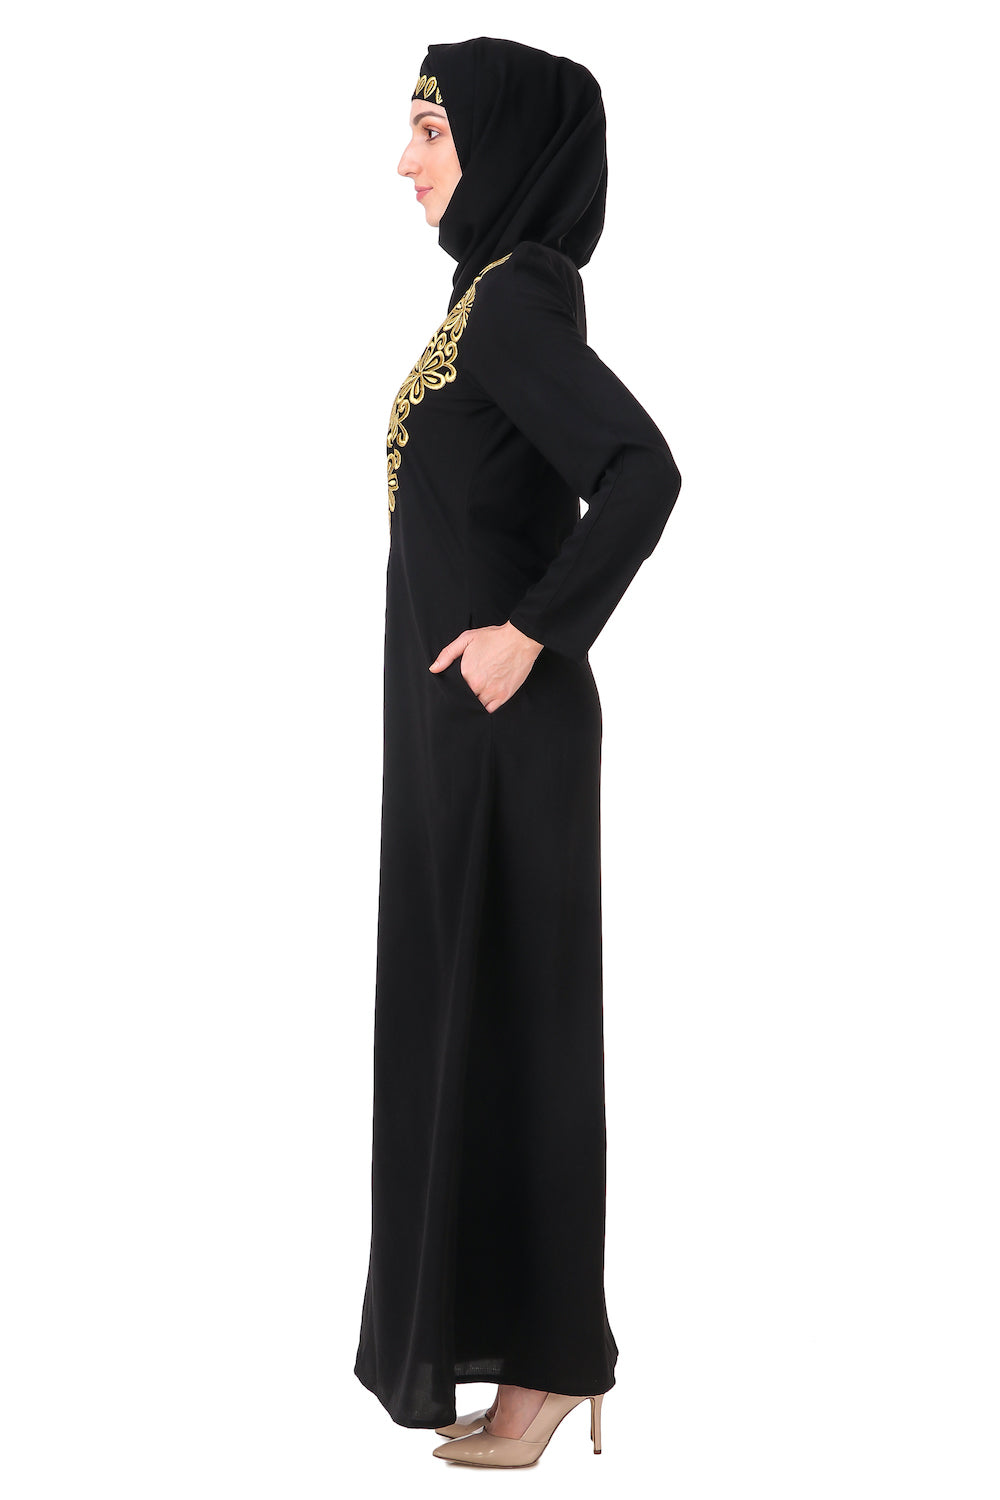 Gold Hand Embroidered Neck Fancy Abaya AY-809